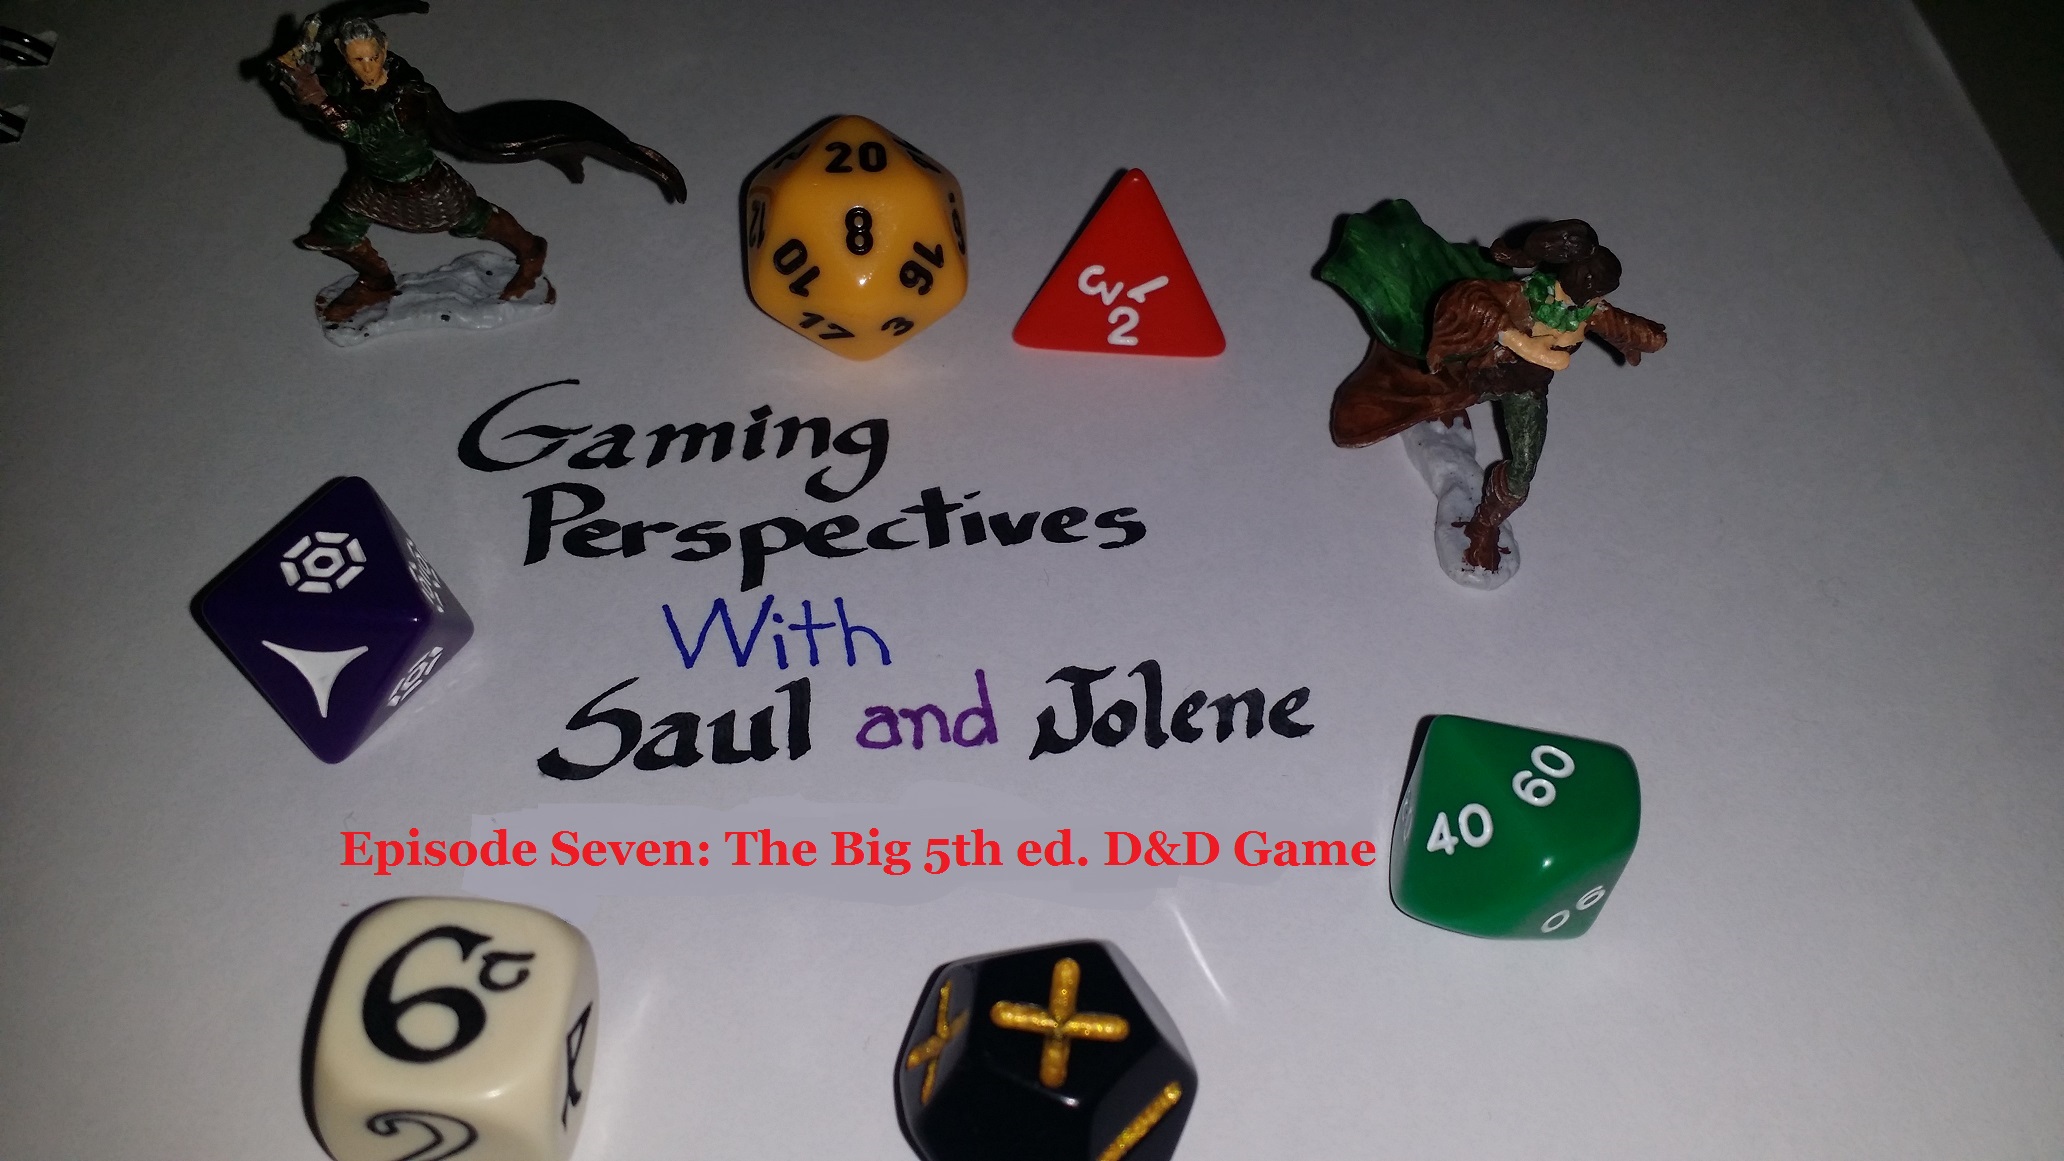 Gaming Perspectives With Saul and Jolene Episode Seven: The Big 5th Edition Dungeons and Dragons Game.